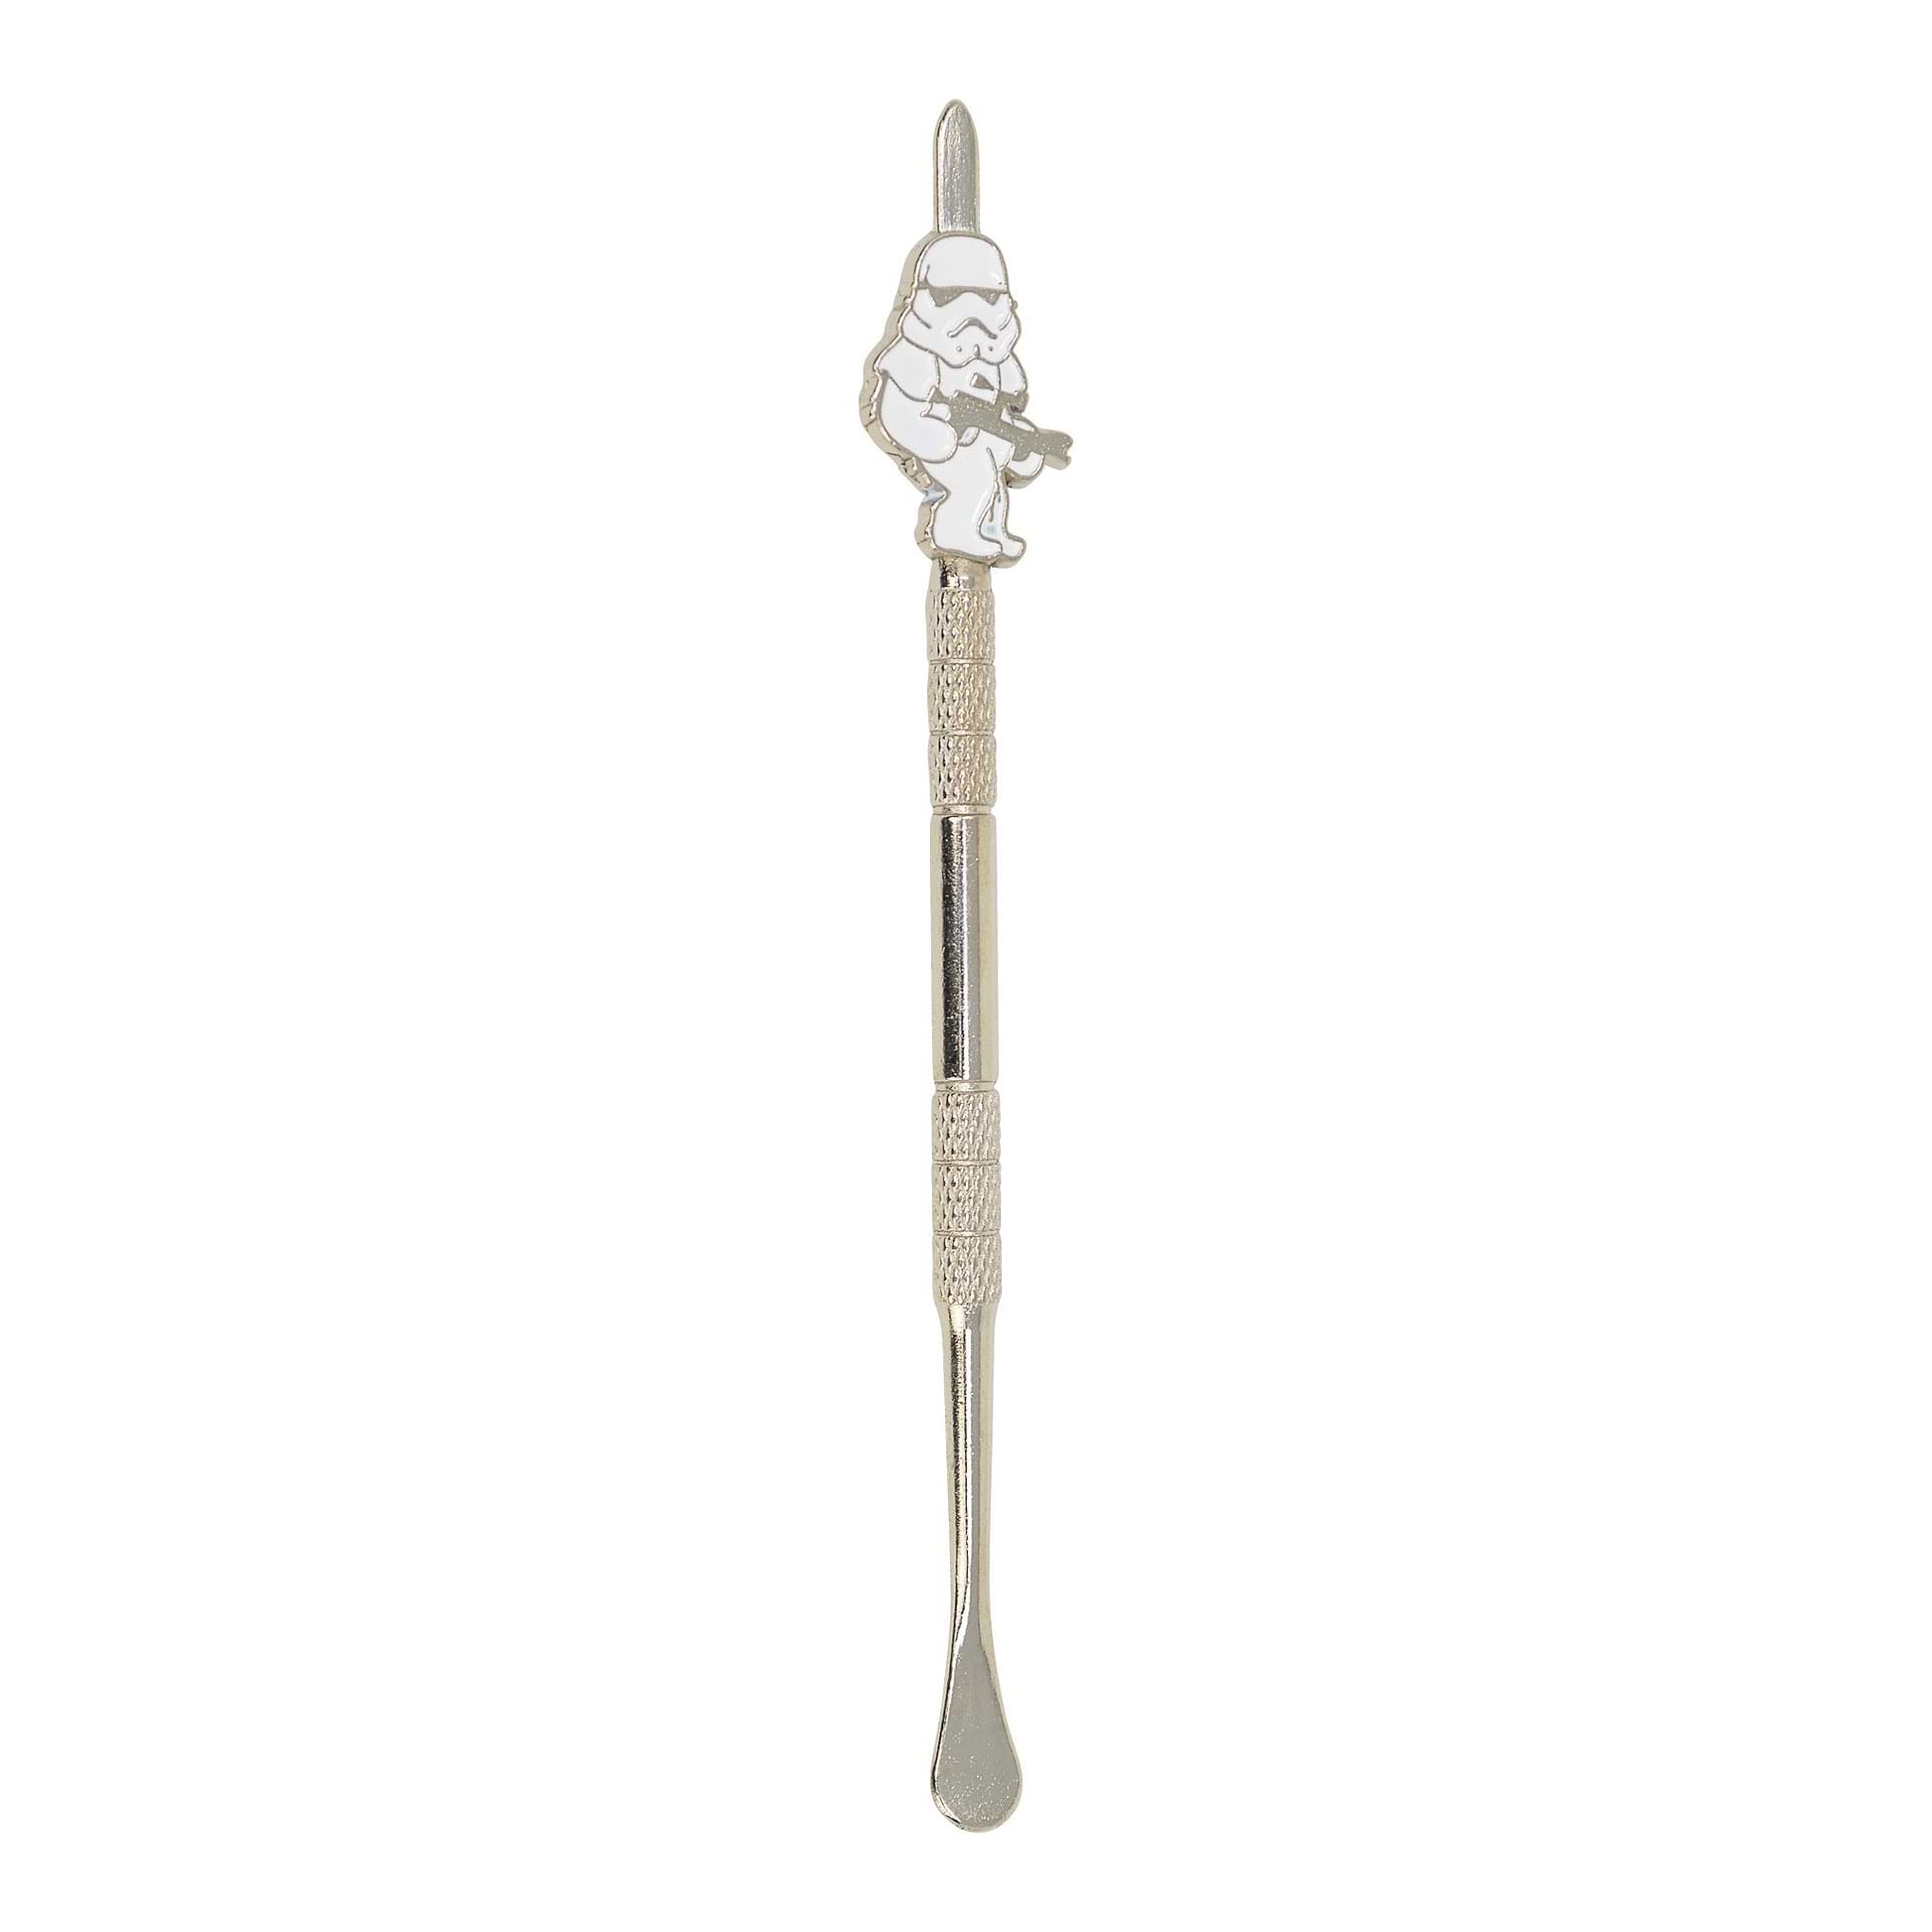 Handy metal dab tool smoking accessory dabber with textured handle in dope Star Wars Stormtrooper design on the handle